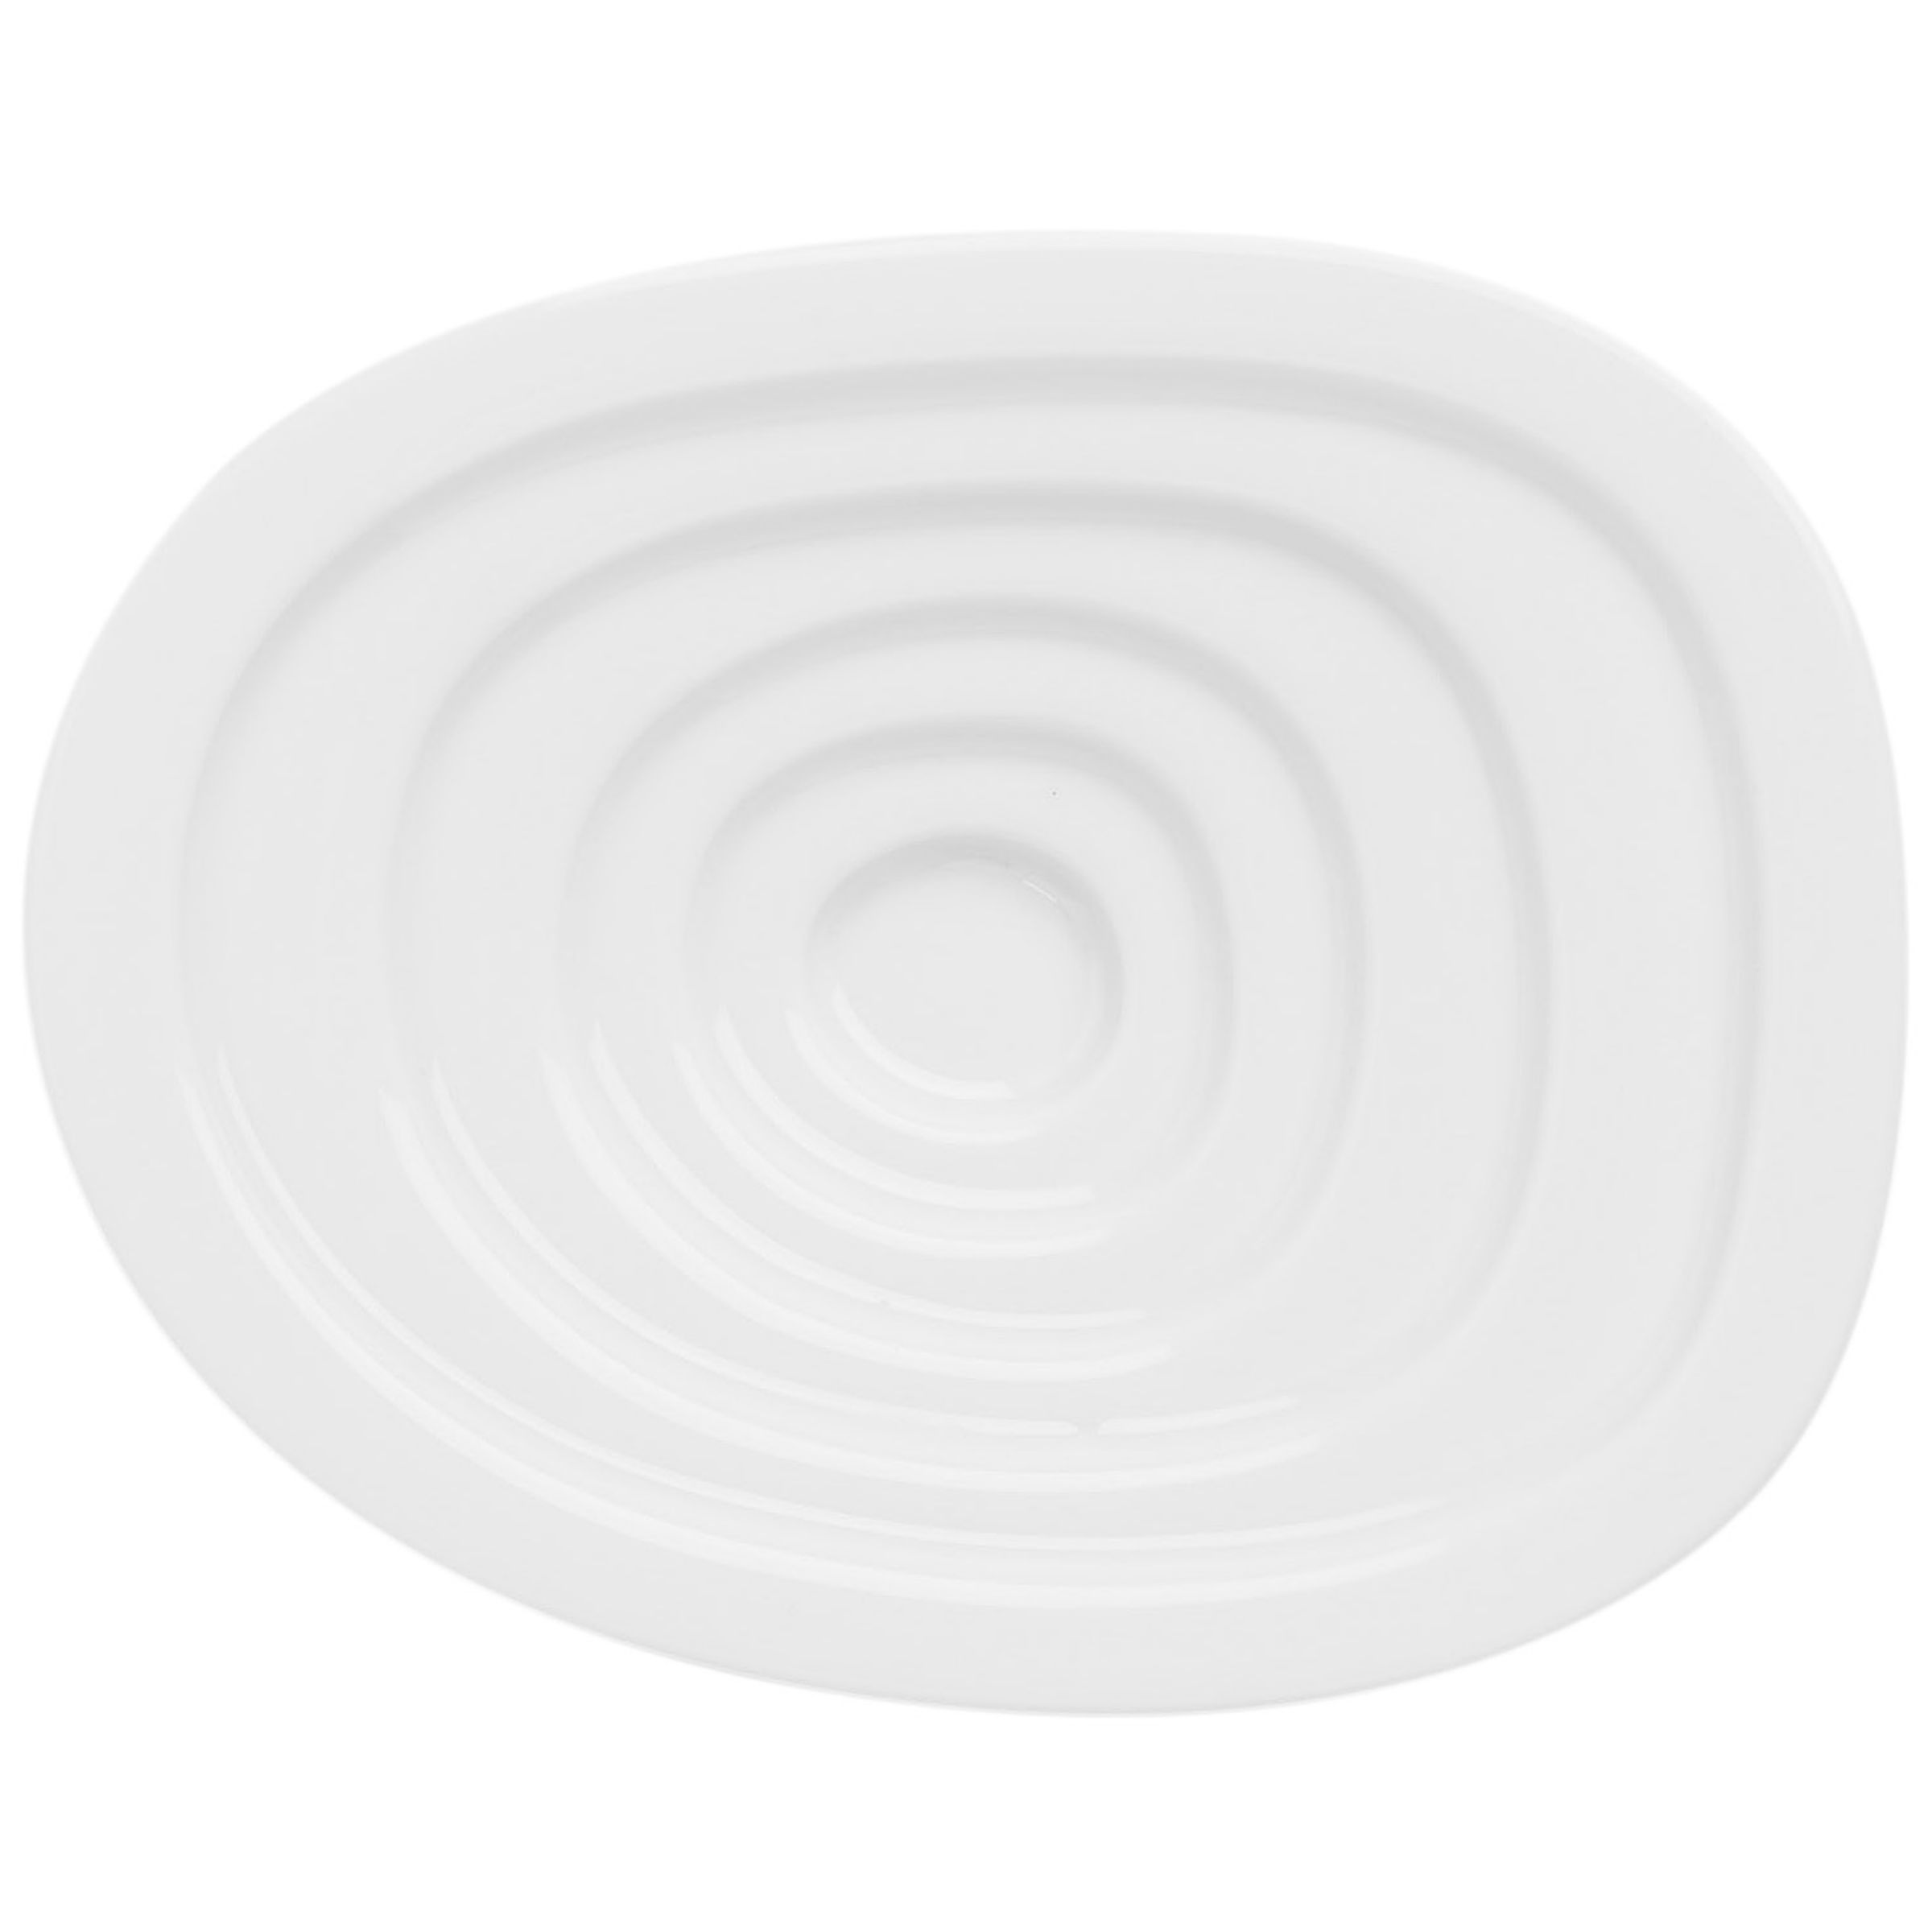 Isola Ridged Dipping Dishes, Box of 2